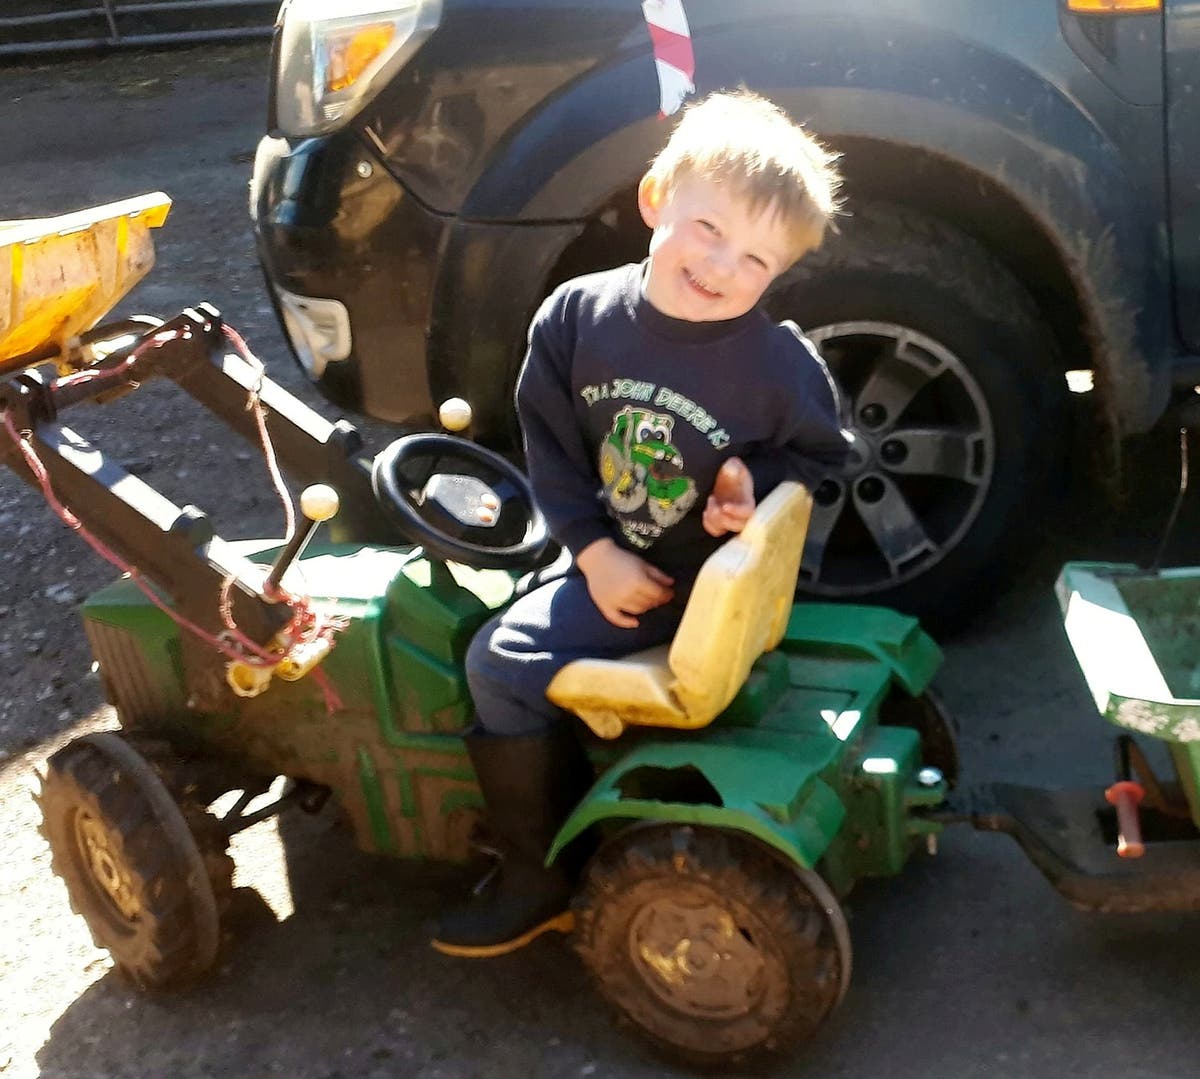 Uncle makes heartfelt plea after nephew, 4, crushed to death by tractor